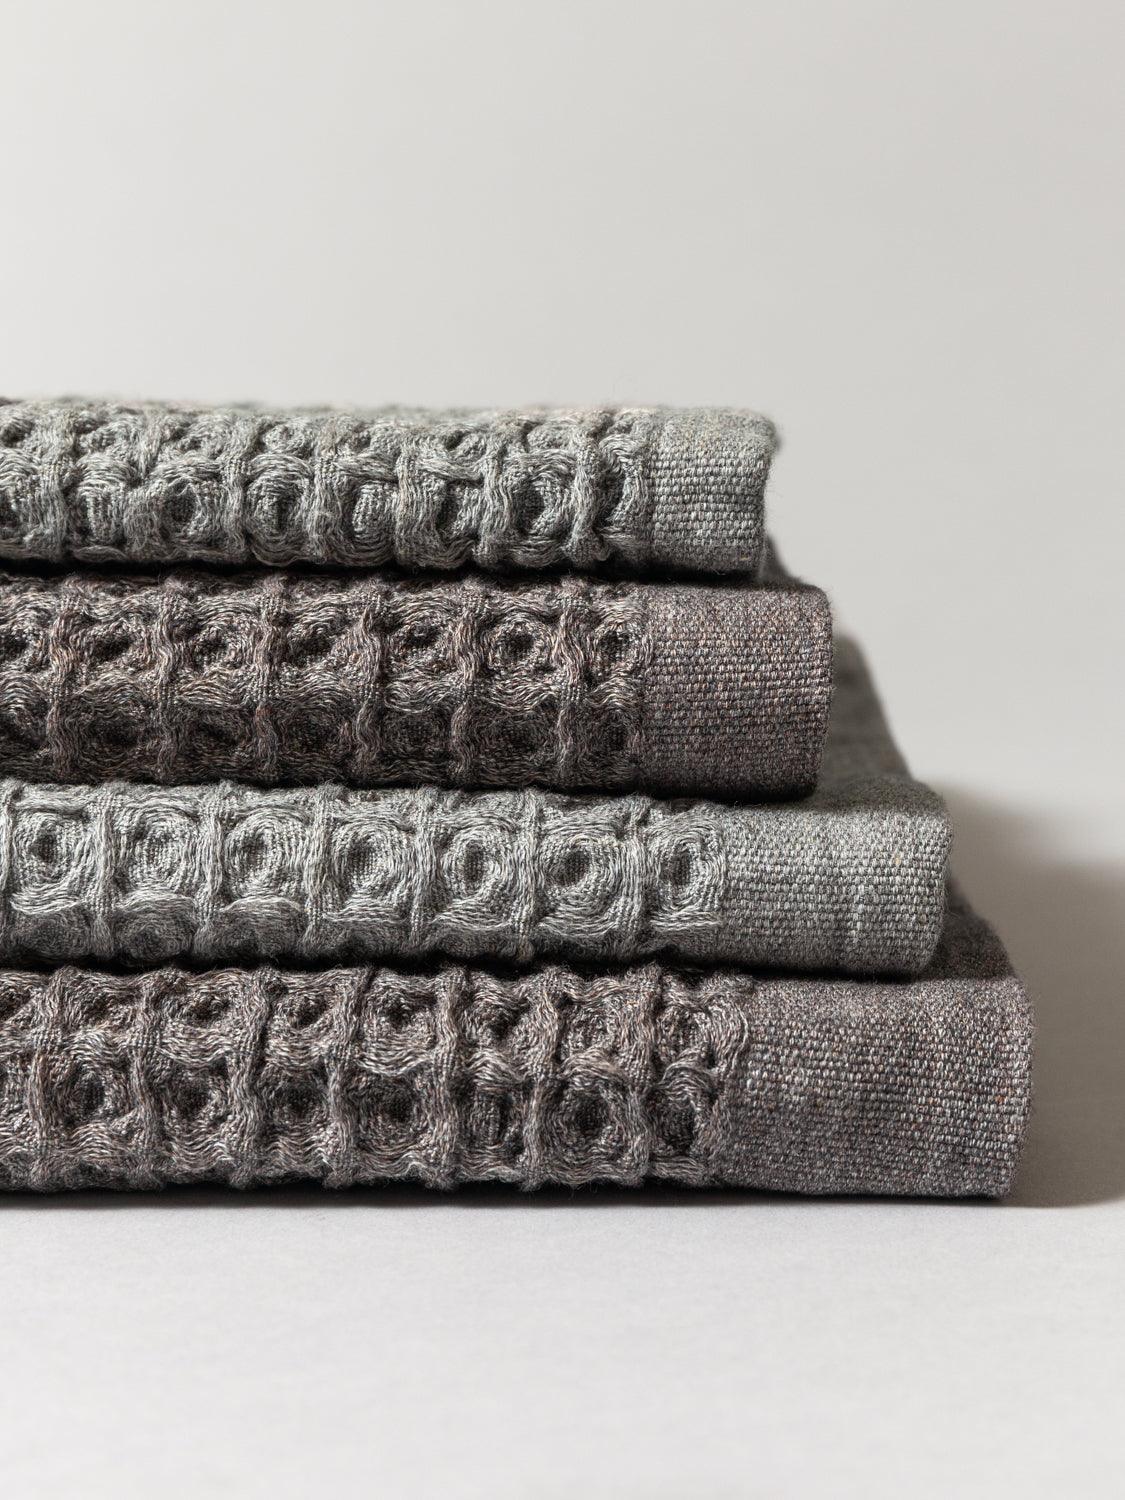 Kontext Japanese Lattice Towels Are the Most Absorbent Towel